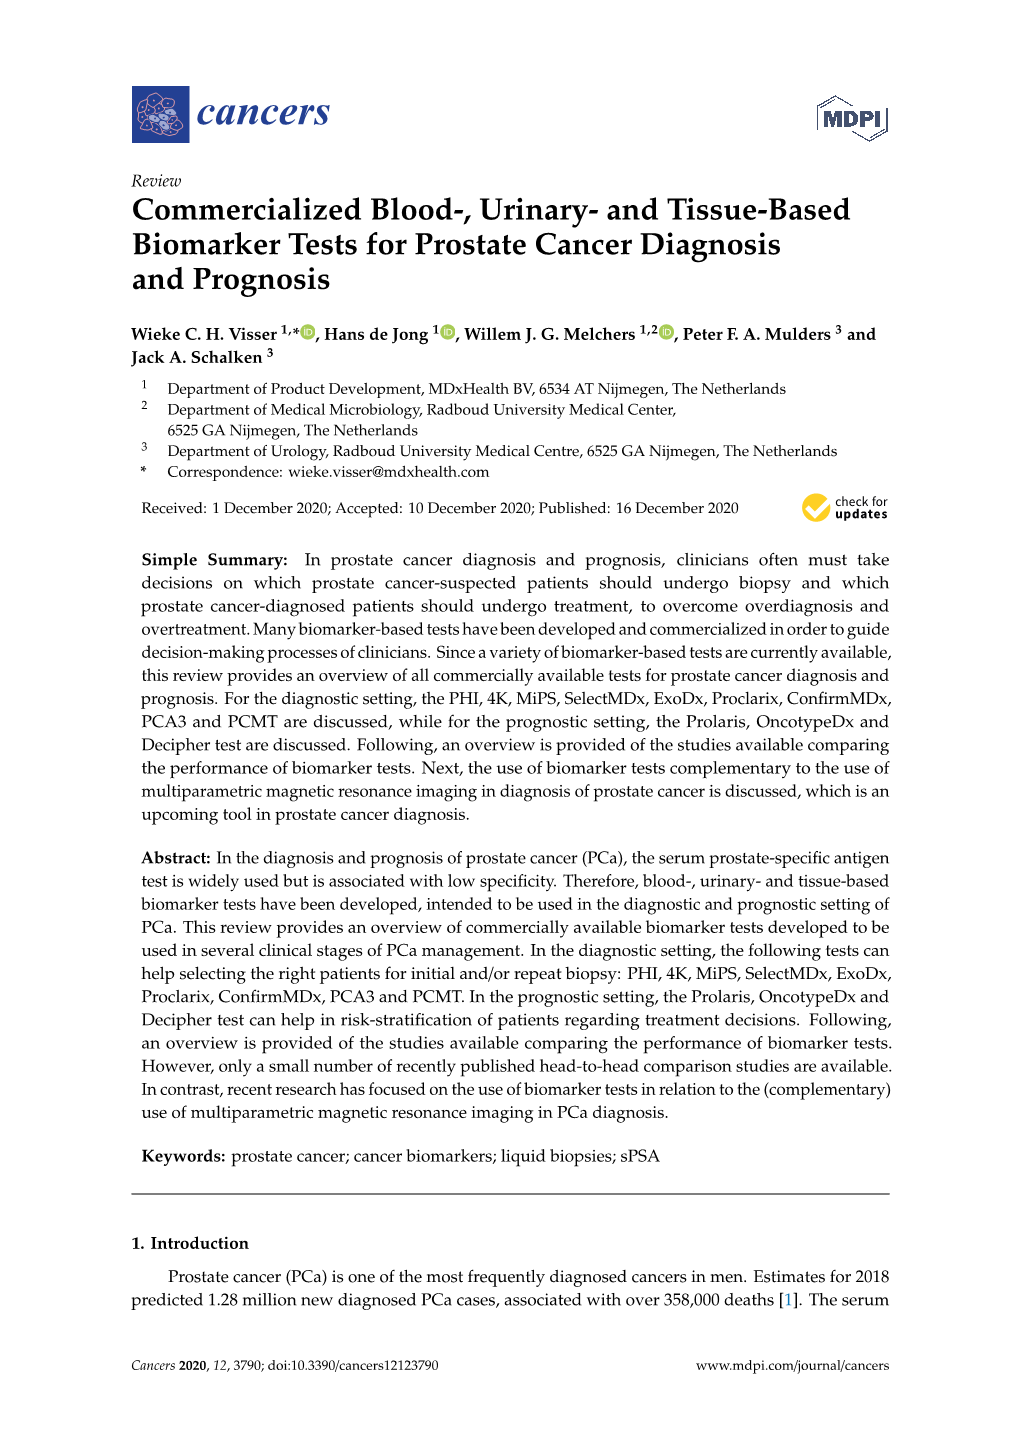 Commercialized Blood-, Urinary- and Tissue-Based Biomarker Tests for Prostate Cancer Diagnosis and Prognosis